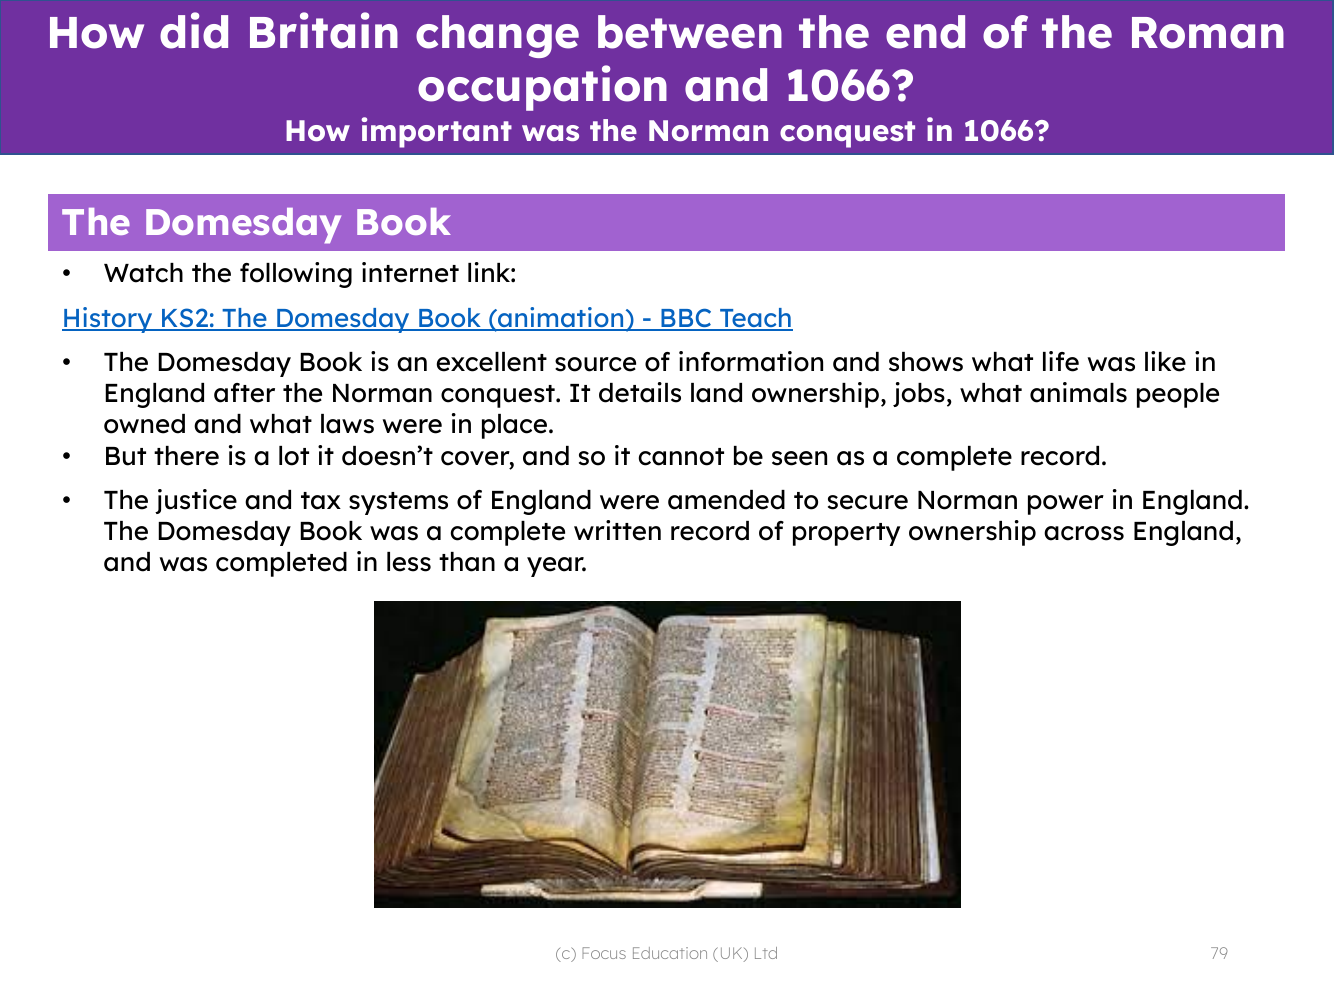 The Domesday book